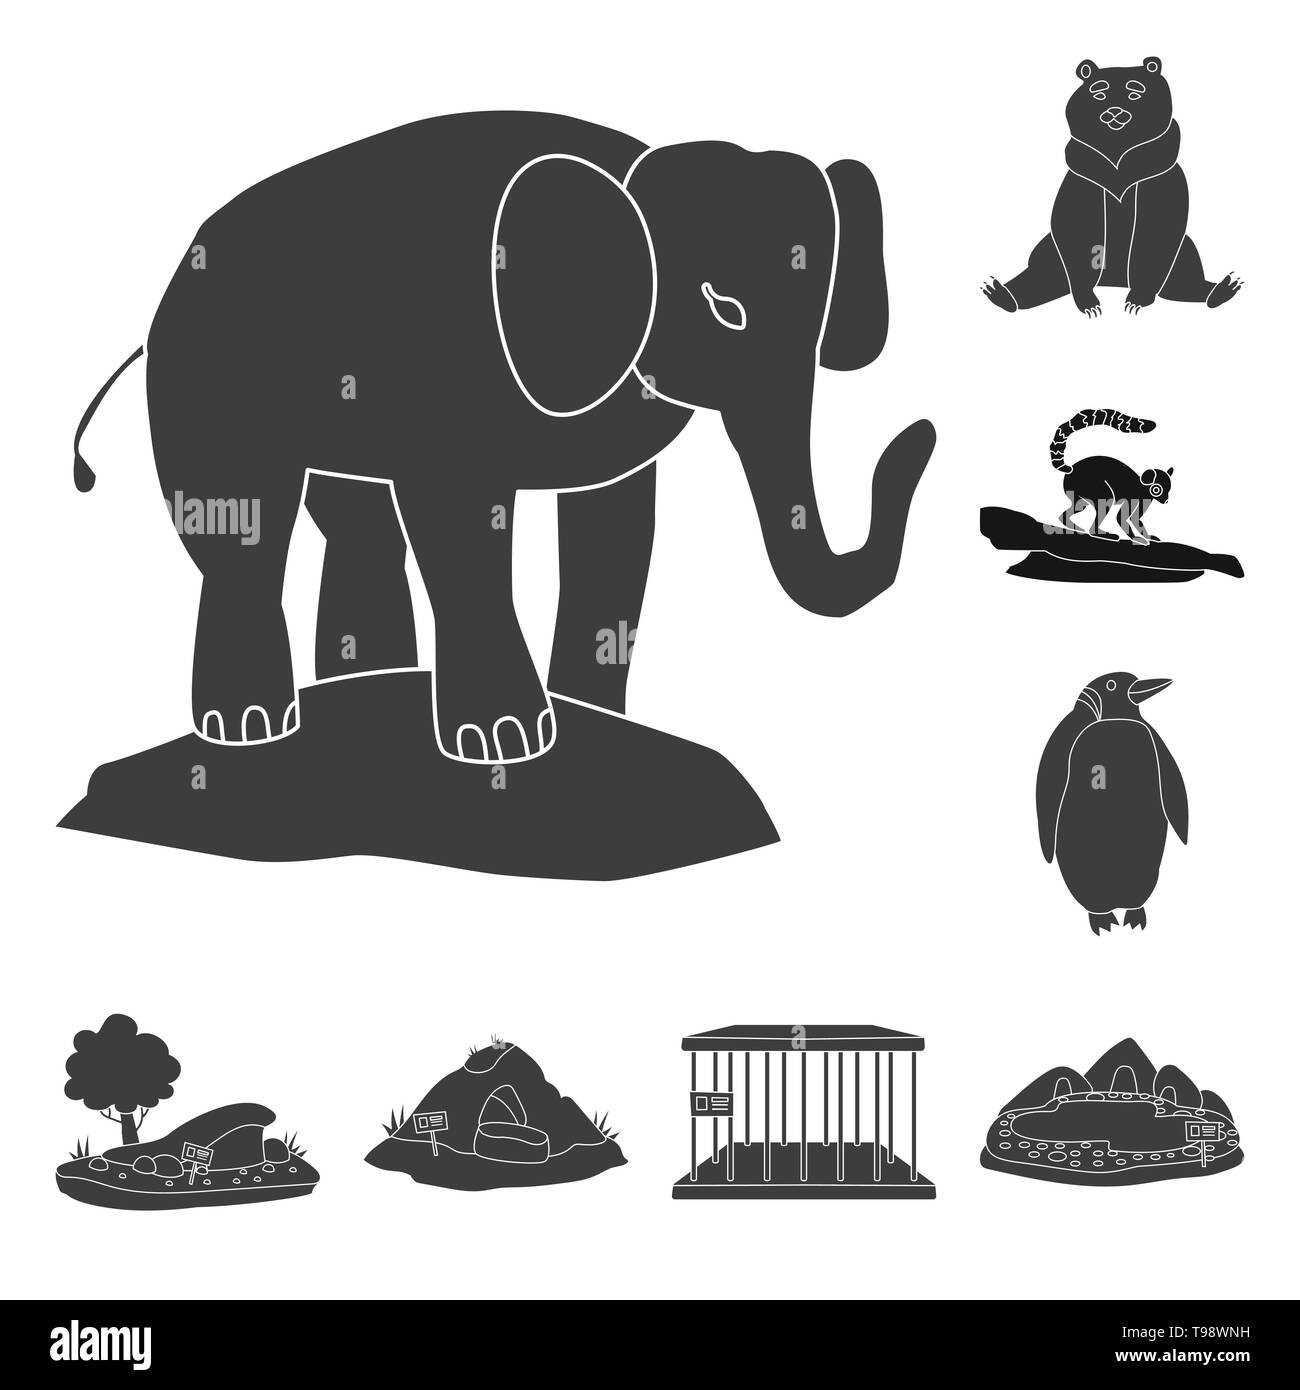 elephant,bear,lemur,penguin,trees,cave,cell,lake,cute,brown,monkey,white,sand,empty,pool,nursery,Africa,mound,grizzly,jail,water,sleep,tree,wild,grass,rock,metal,stone,fauna,entertainment,zoo,park,safari,animal,forest,nature,fun,flora,set,vector,icon,illustration,isolated,collection,design,element,graphic,sign,black,simple Vector Vectors , Stock Vector